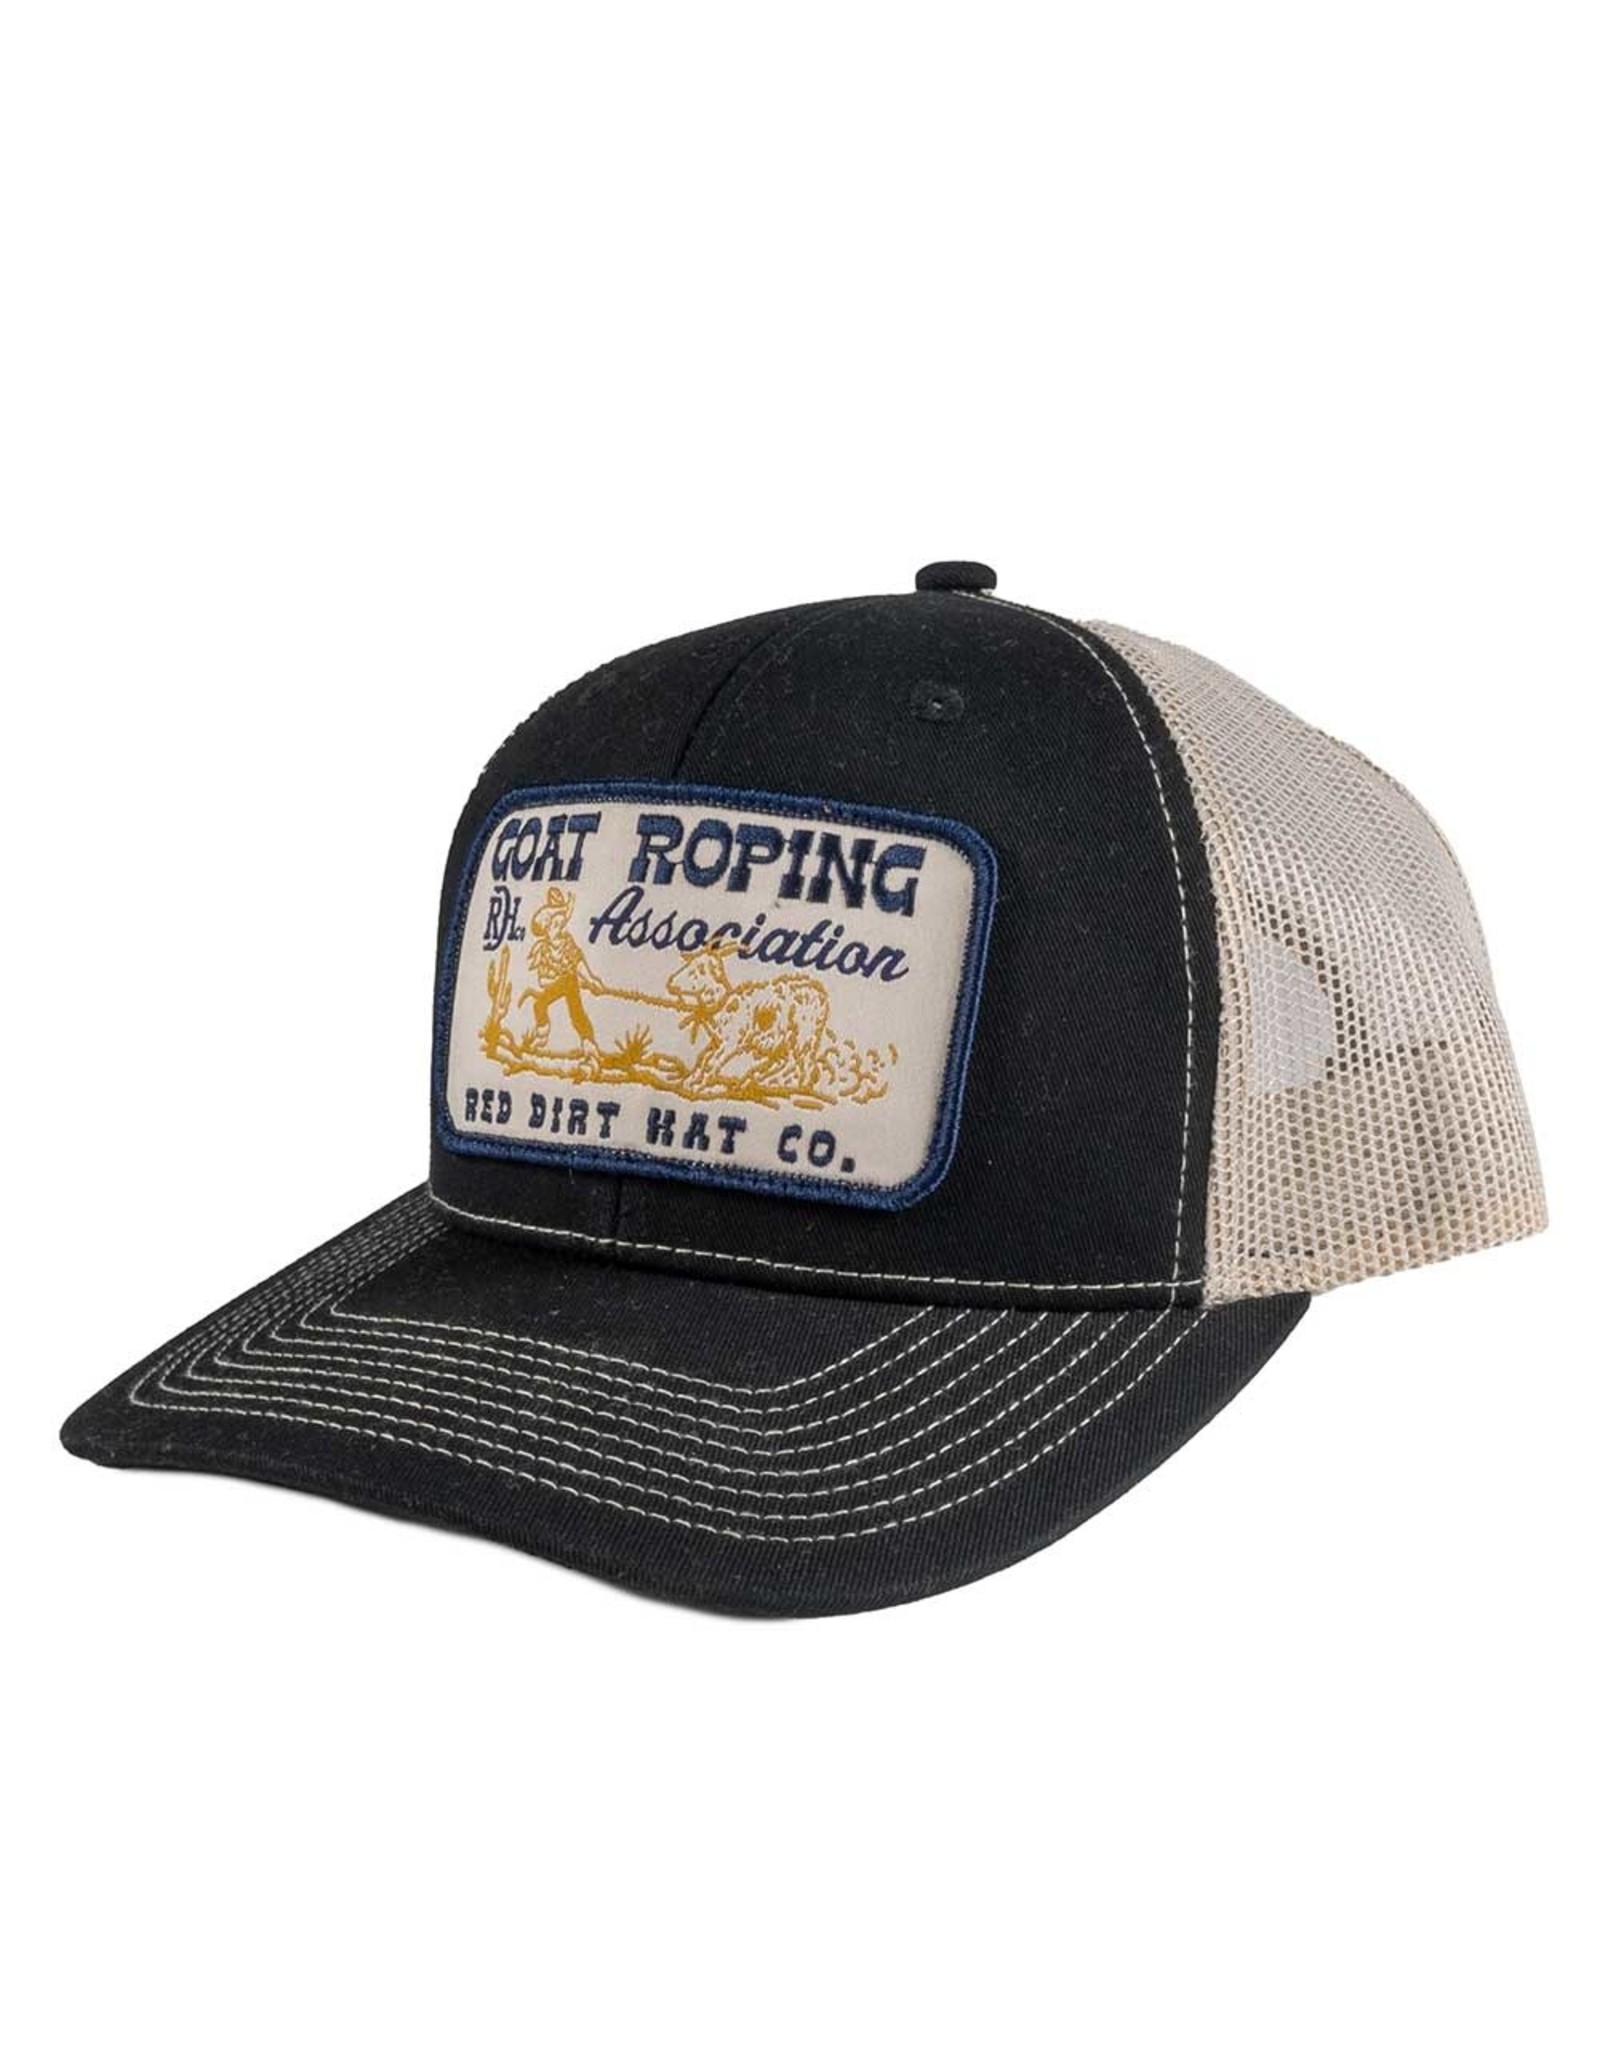 Red Dirt Hat Company Red Dirt Hat Co. Goat Roping RDHC215 Cap